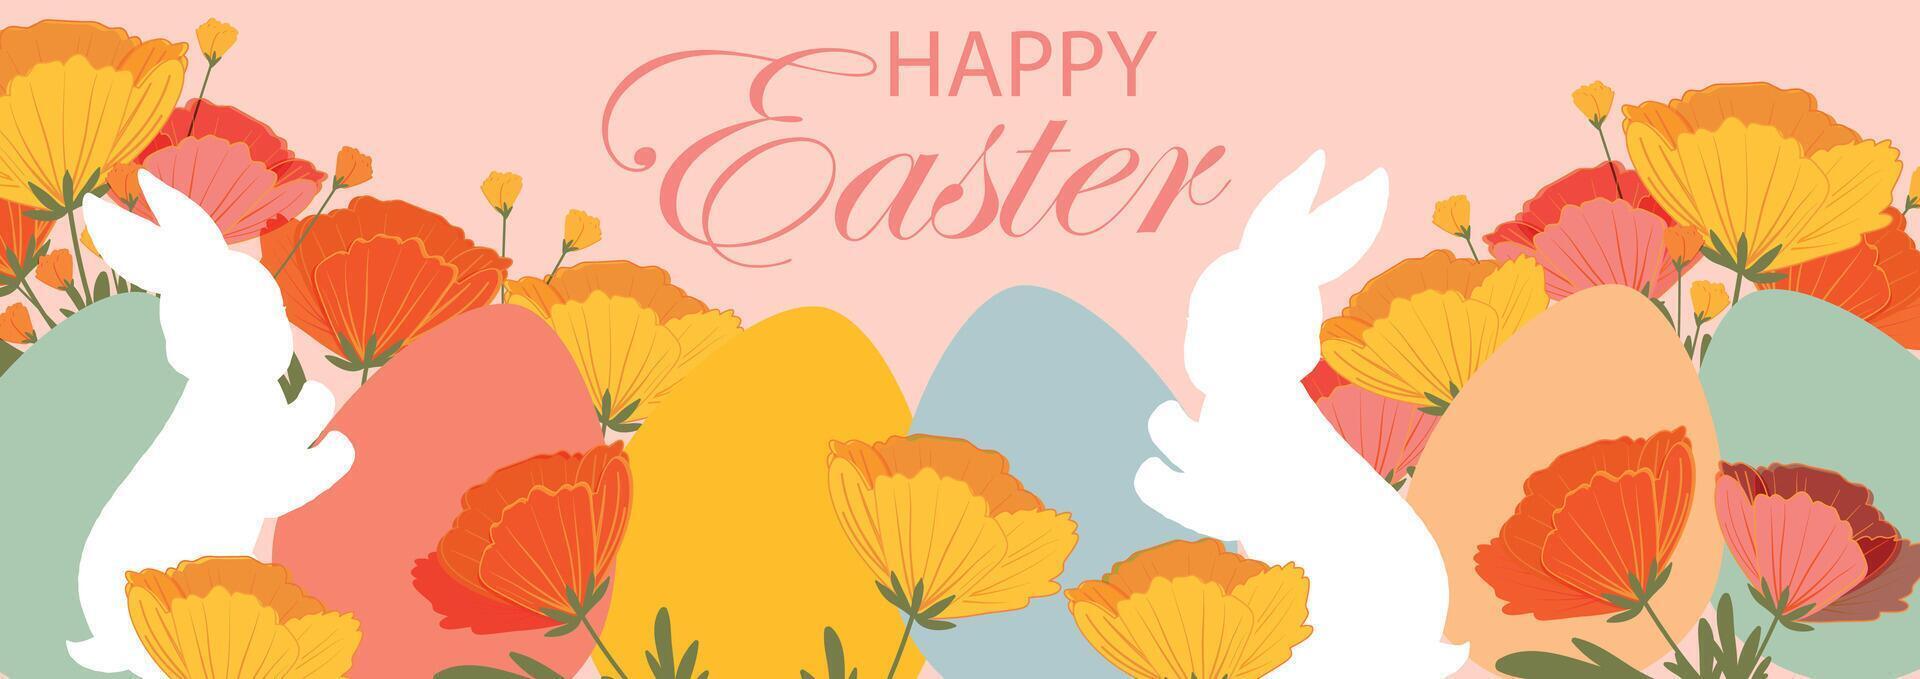 Happy Easter banner. Trendy and bright Easter design  with eggs, easter bunny and spring flowers in pastel colors. Modern art style. Horizontal poster, greeting card, web header vector